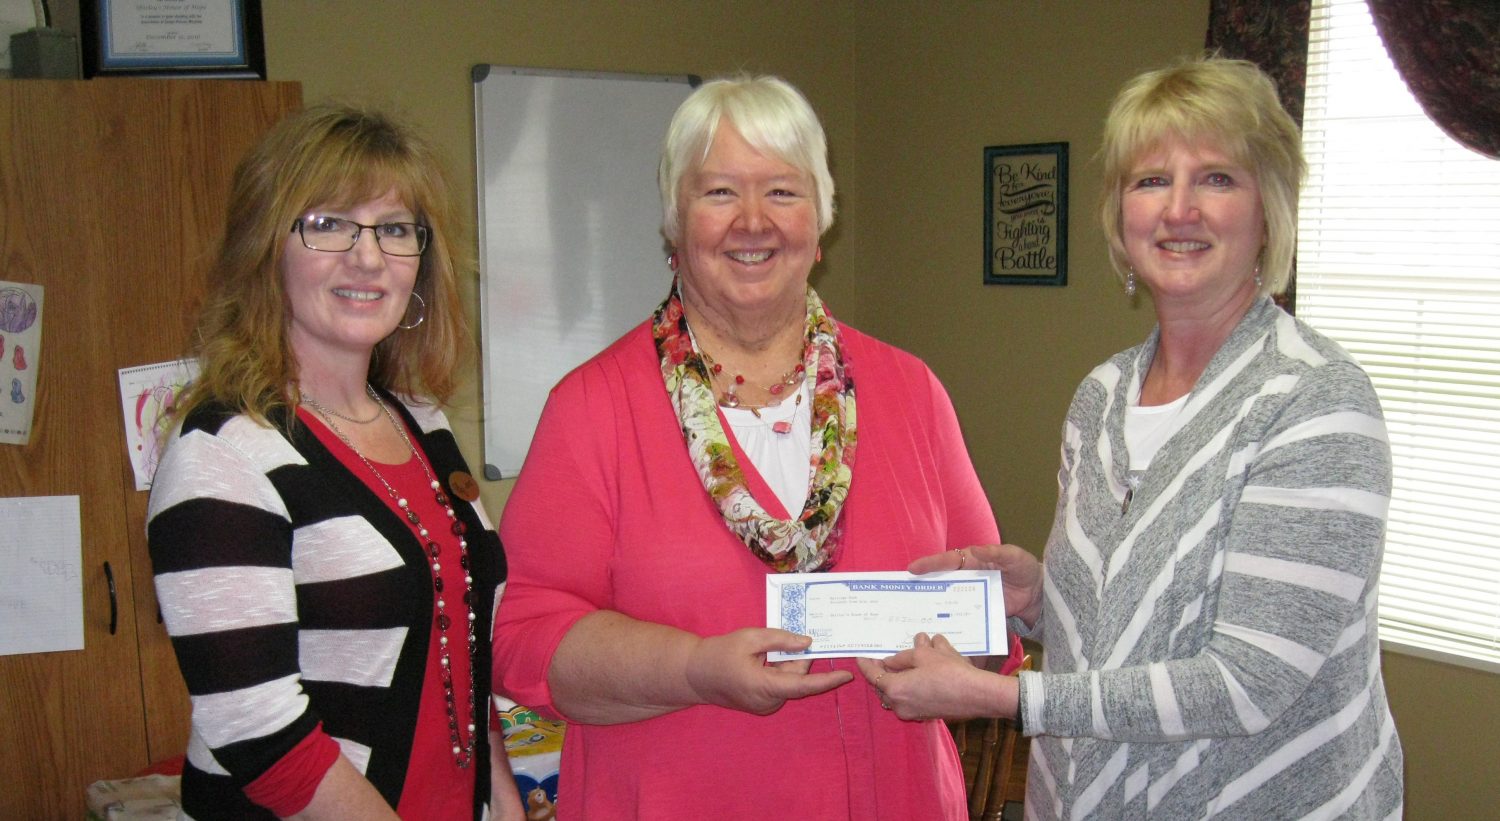 From left to right: Heritage bank employee Janet Kleinschmidt, Sue Poole of Shirley’s House of Hope, and Heritage Bank employee Kathy Meidl pose with a donation check to the domestic violence shelter.